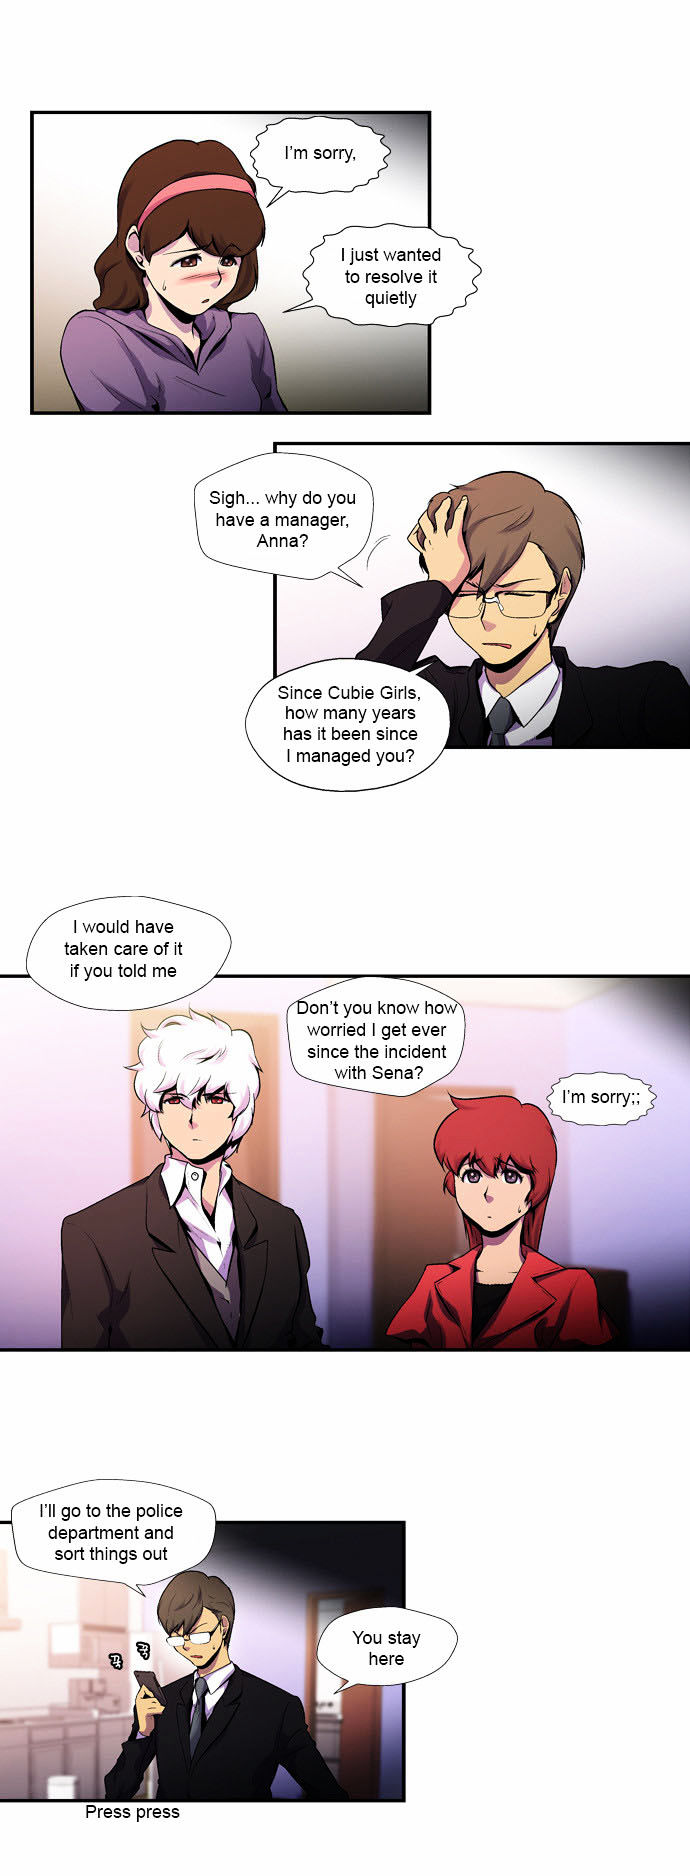 Dr. Frost - Page 2